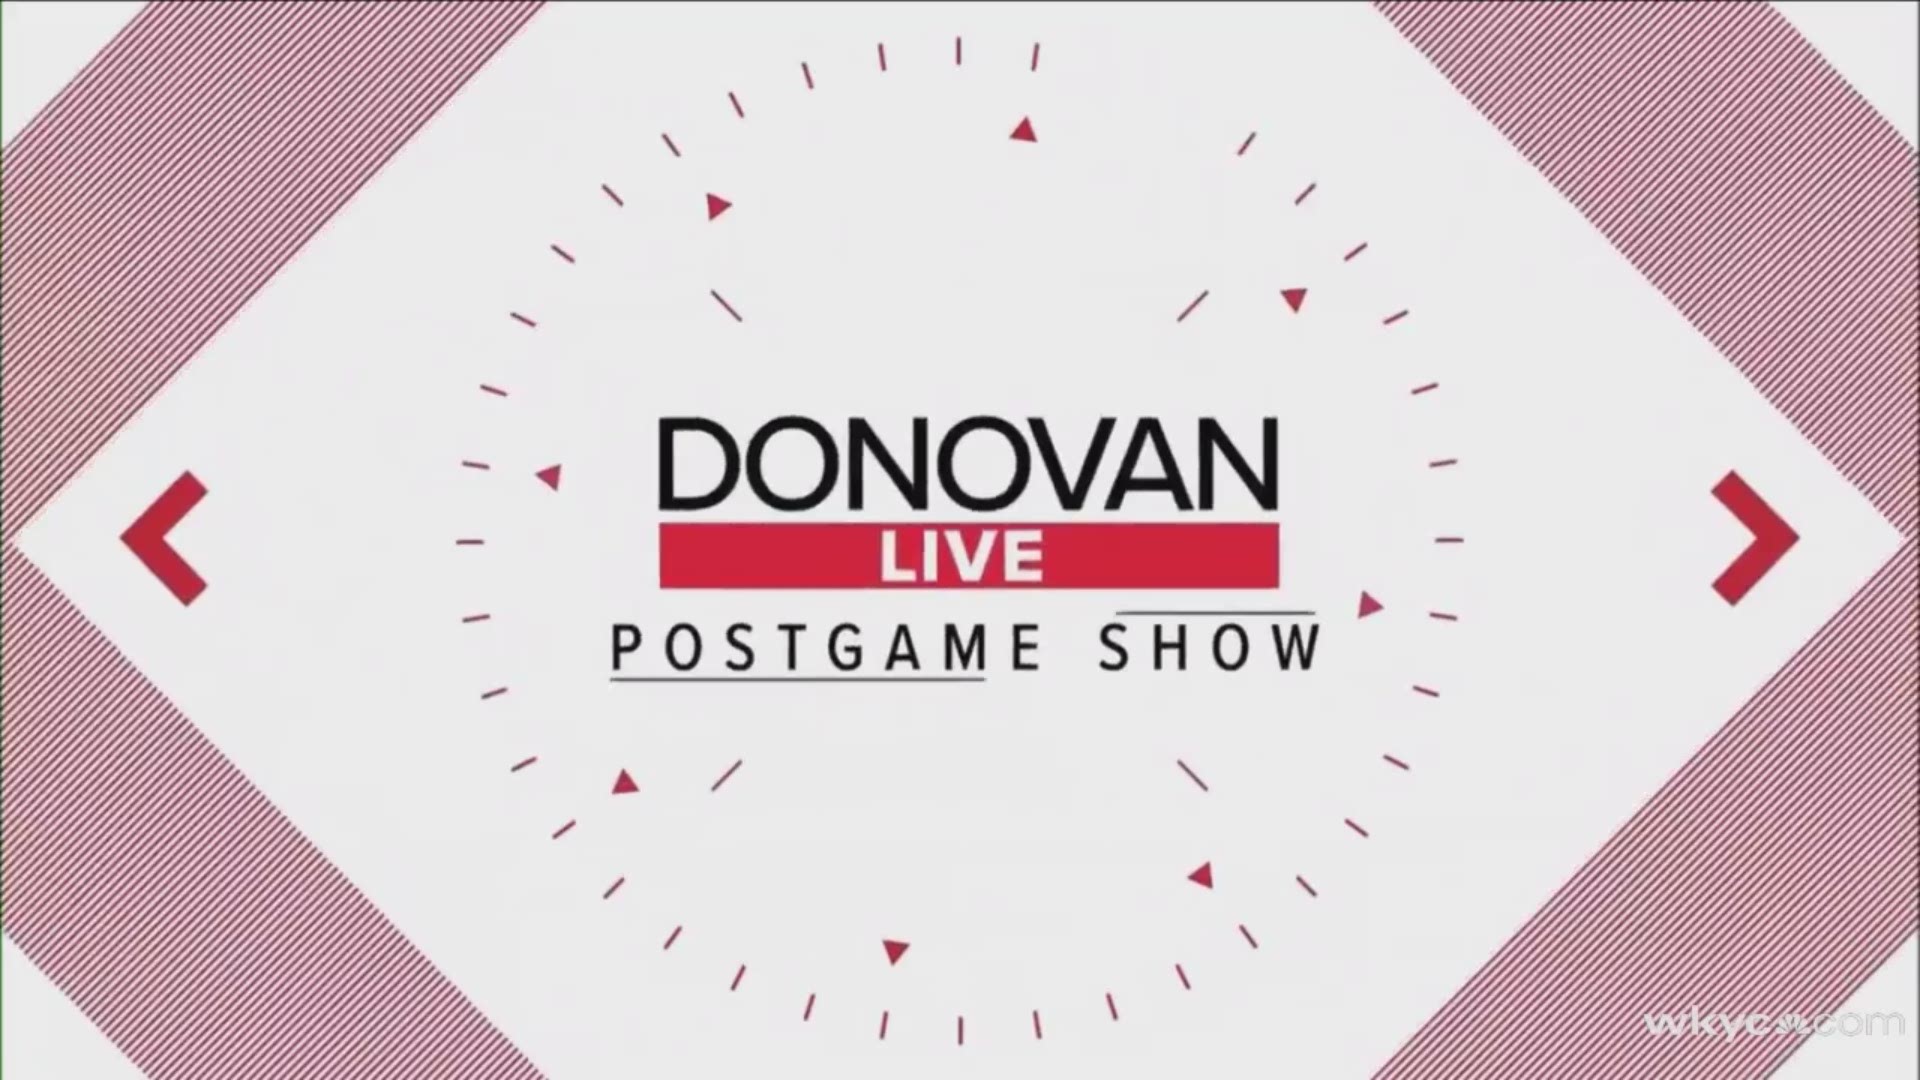 The Q has a new name: The Donovan Live Postgame Show